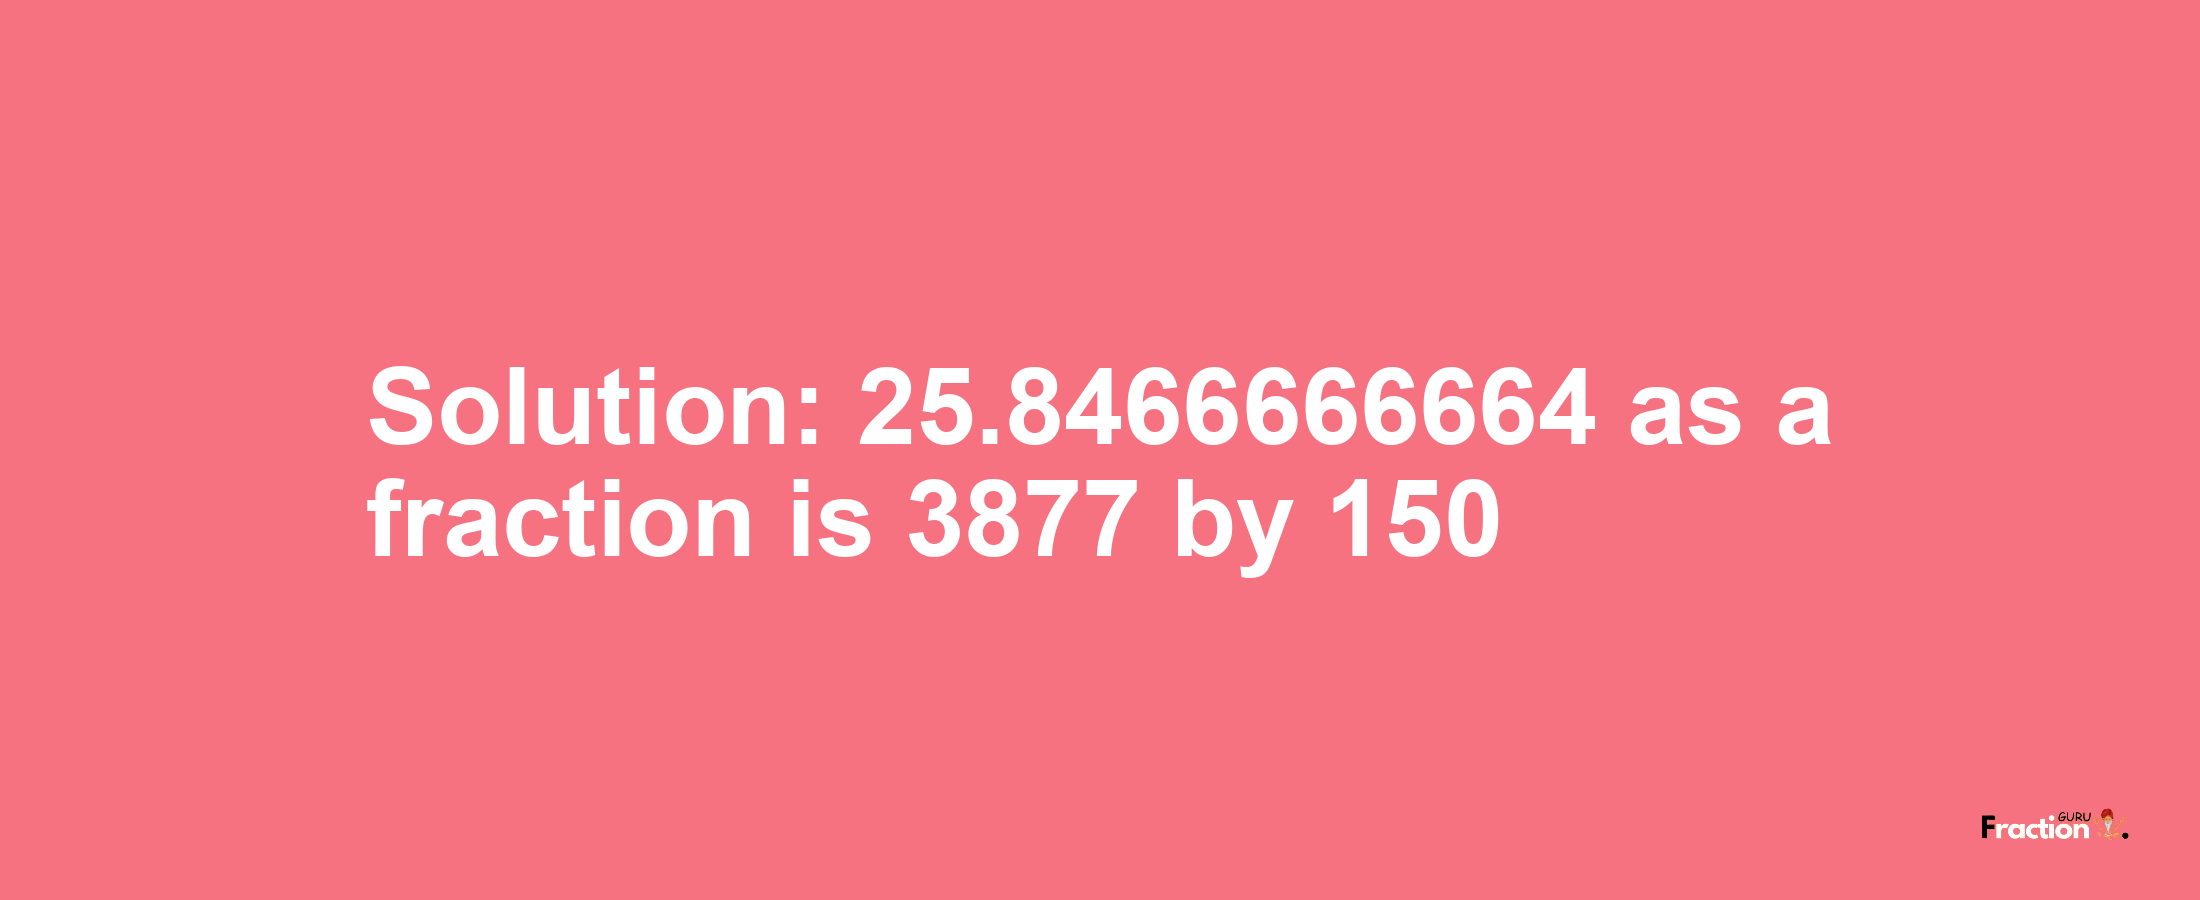 Solution:25.8466666664 as a fraction is 3877/150